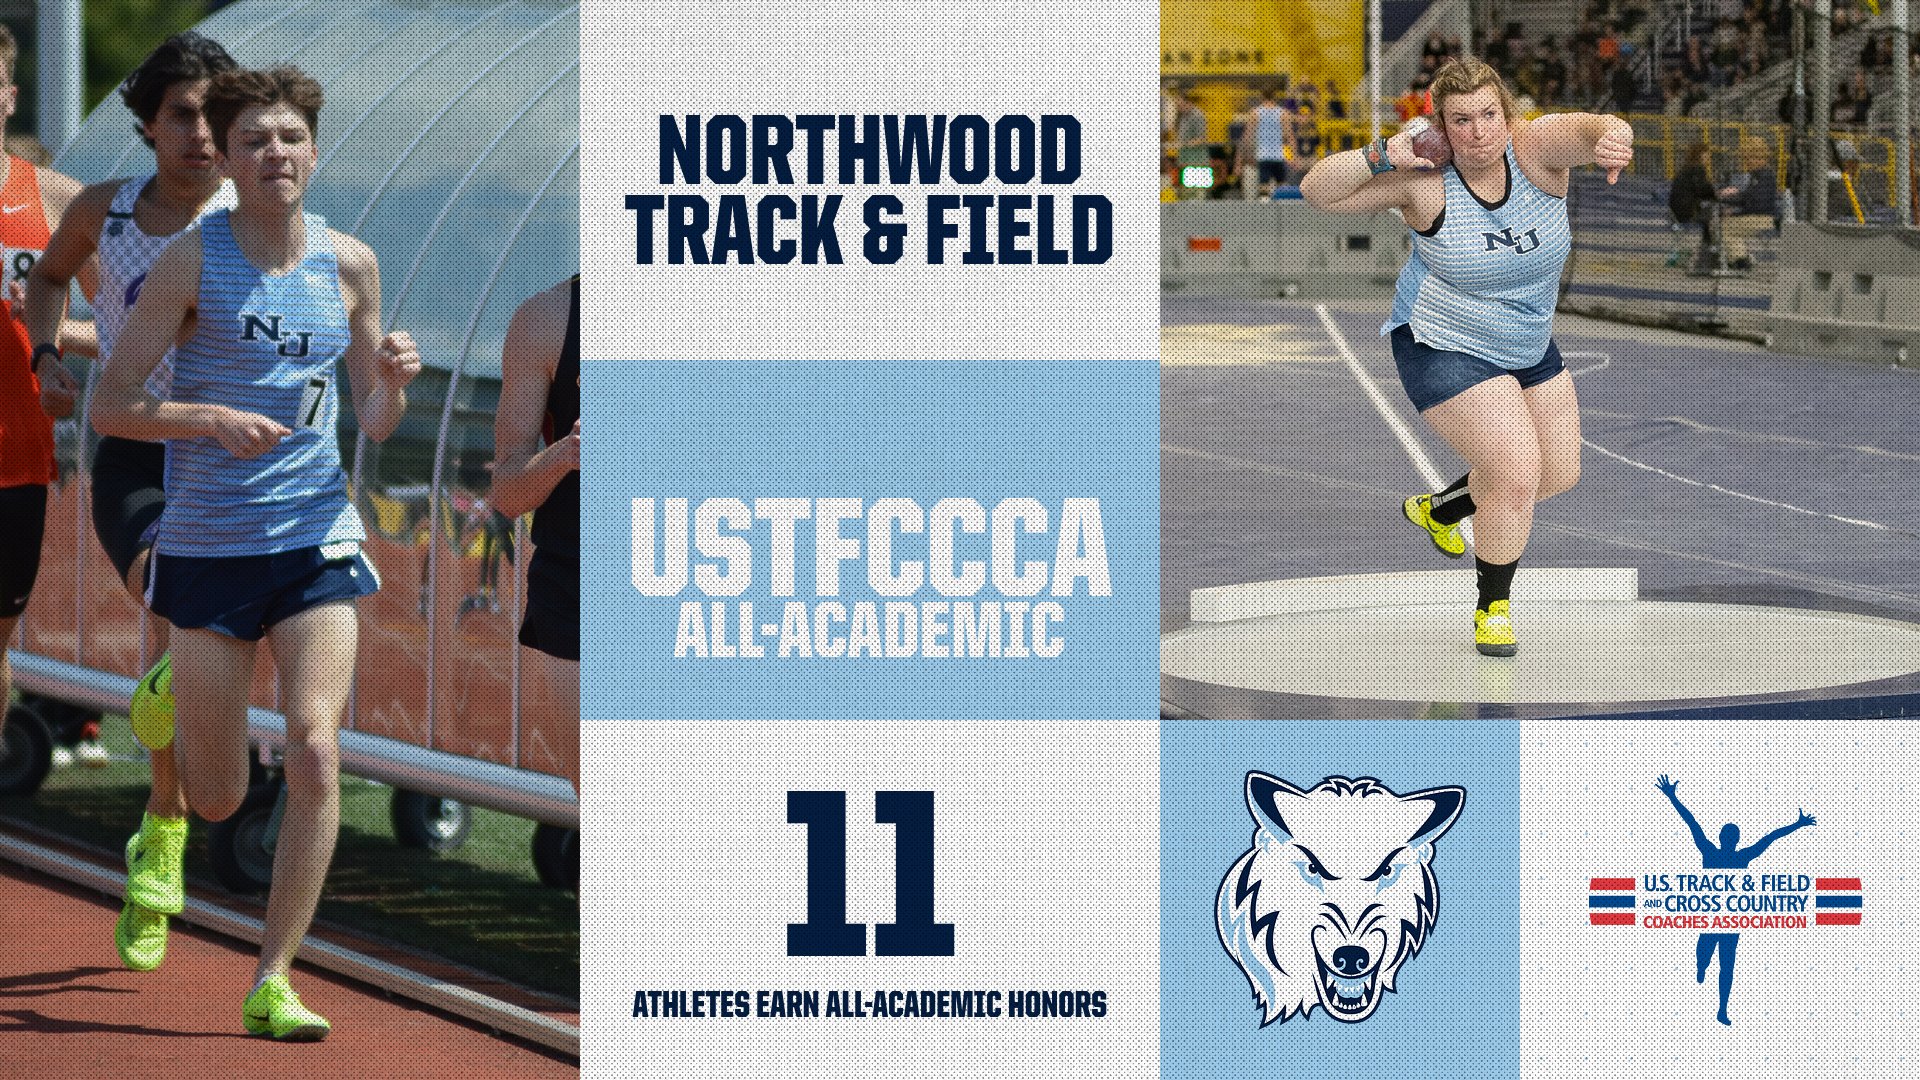 Track &amp; Field Has 11 Athletes Earn All-Academic Honors By USTFCCCA